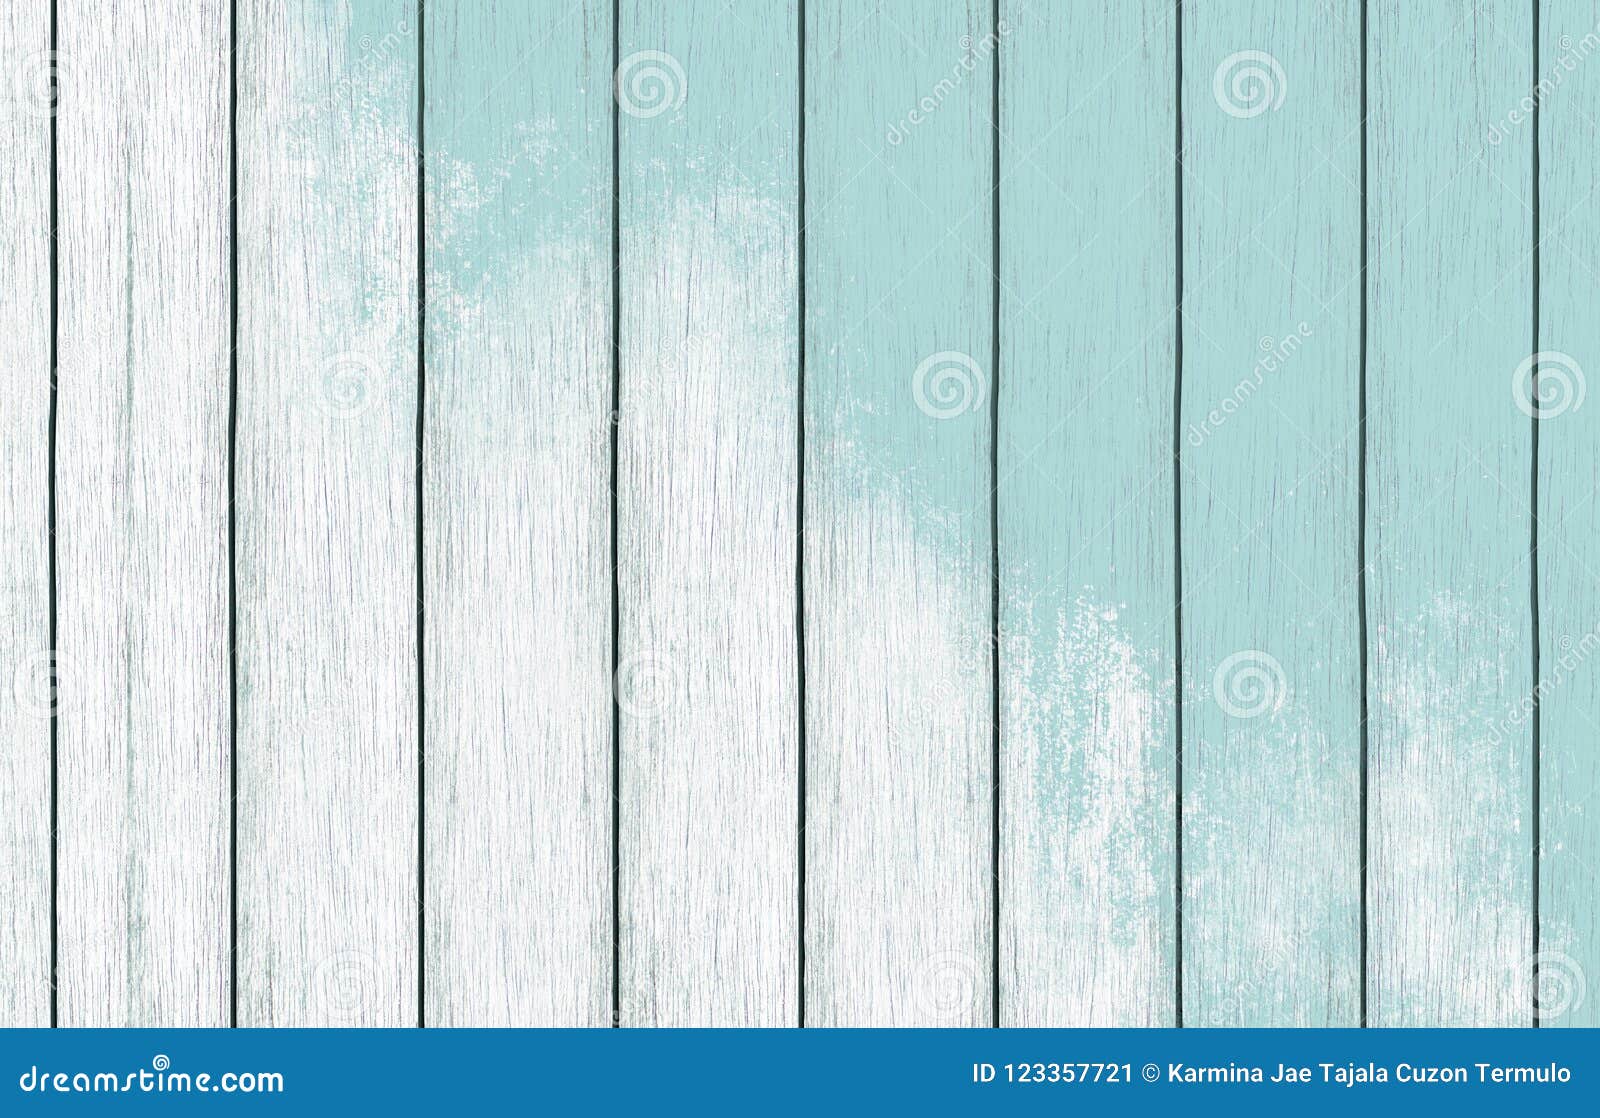 Painted Wood Background Wallpaper with Light Blue Color Paint Stock Image -  Image of light, color: 123357721